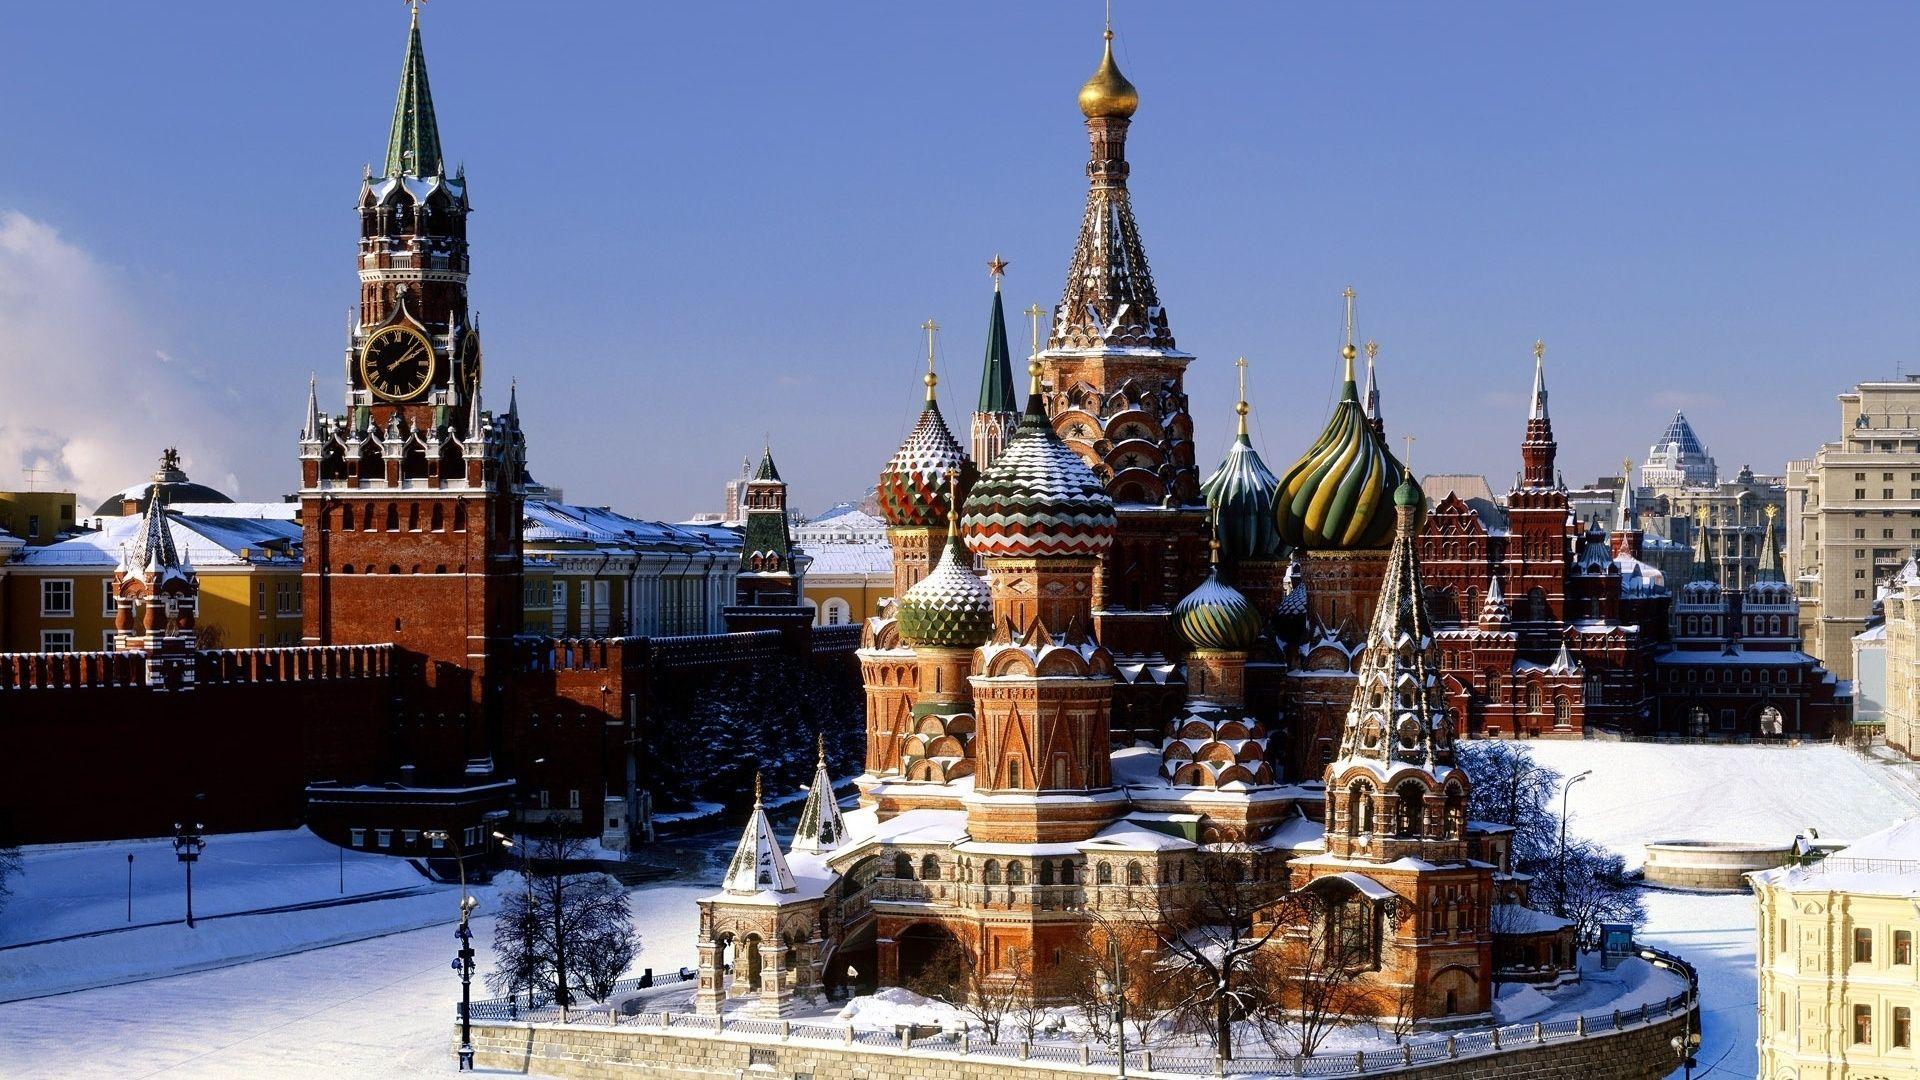 Moscow Kremlin Palace and Red Square in Winter Wallpaper